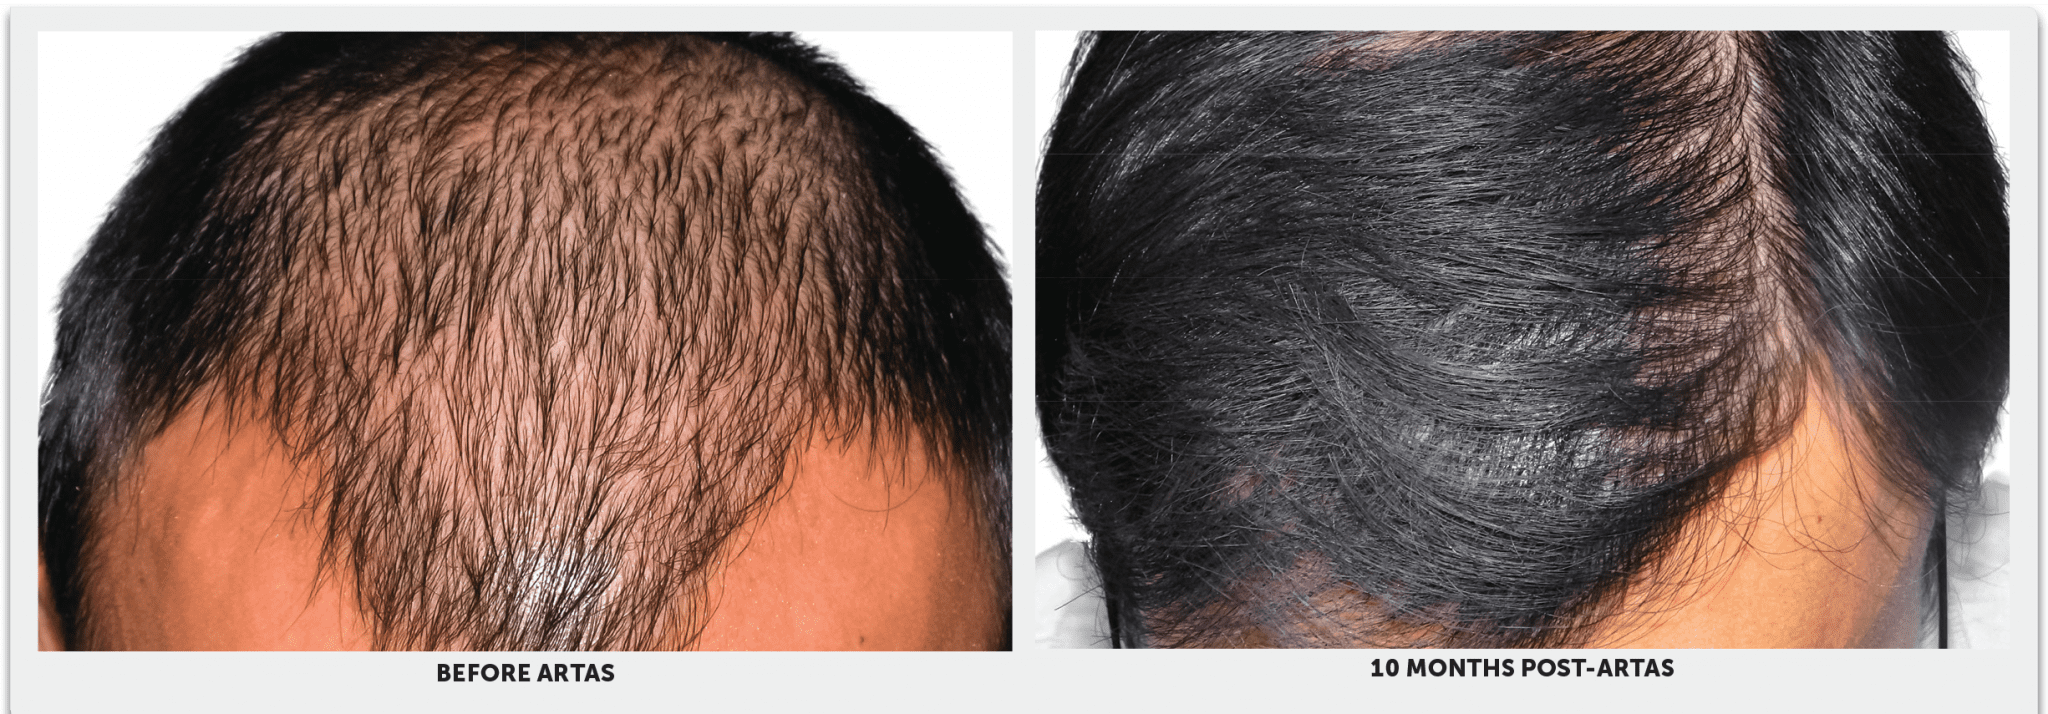 a-men-hair-before-and-after-Artas-hair-restoration-treatment